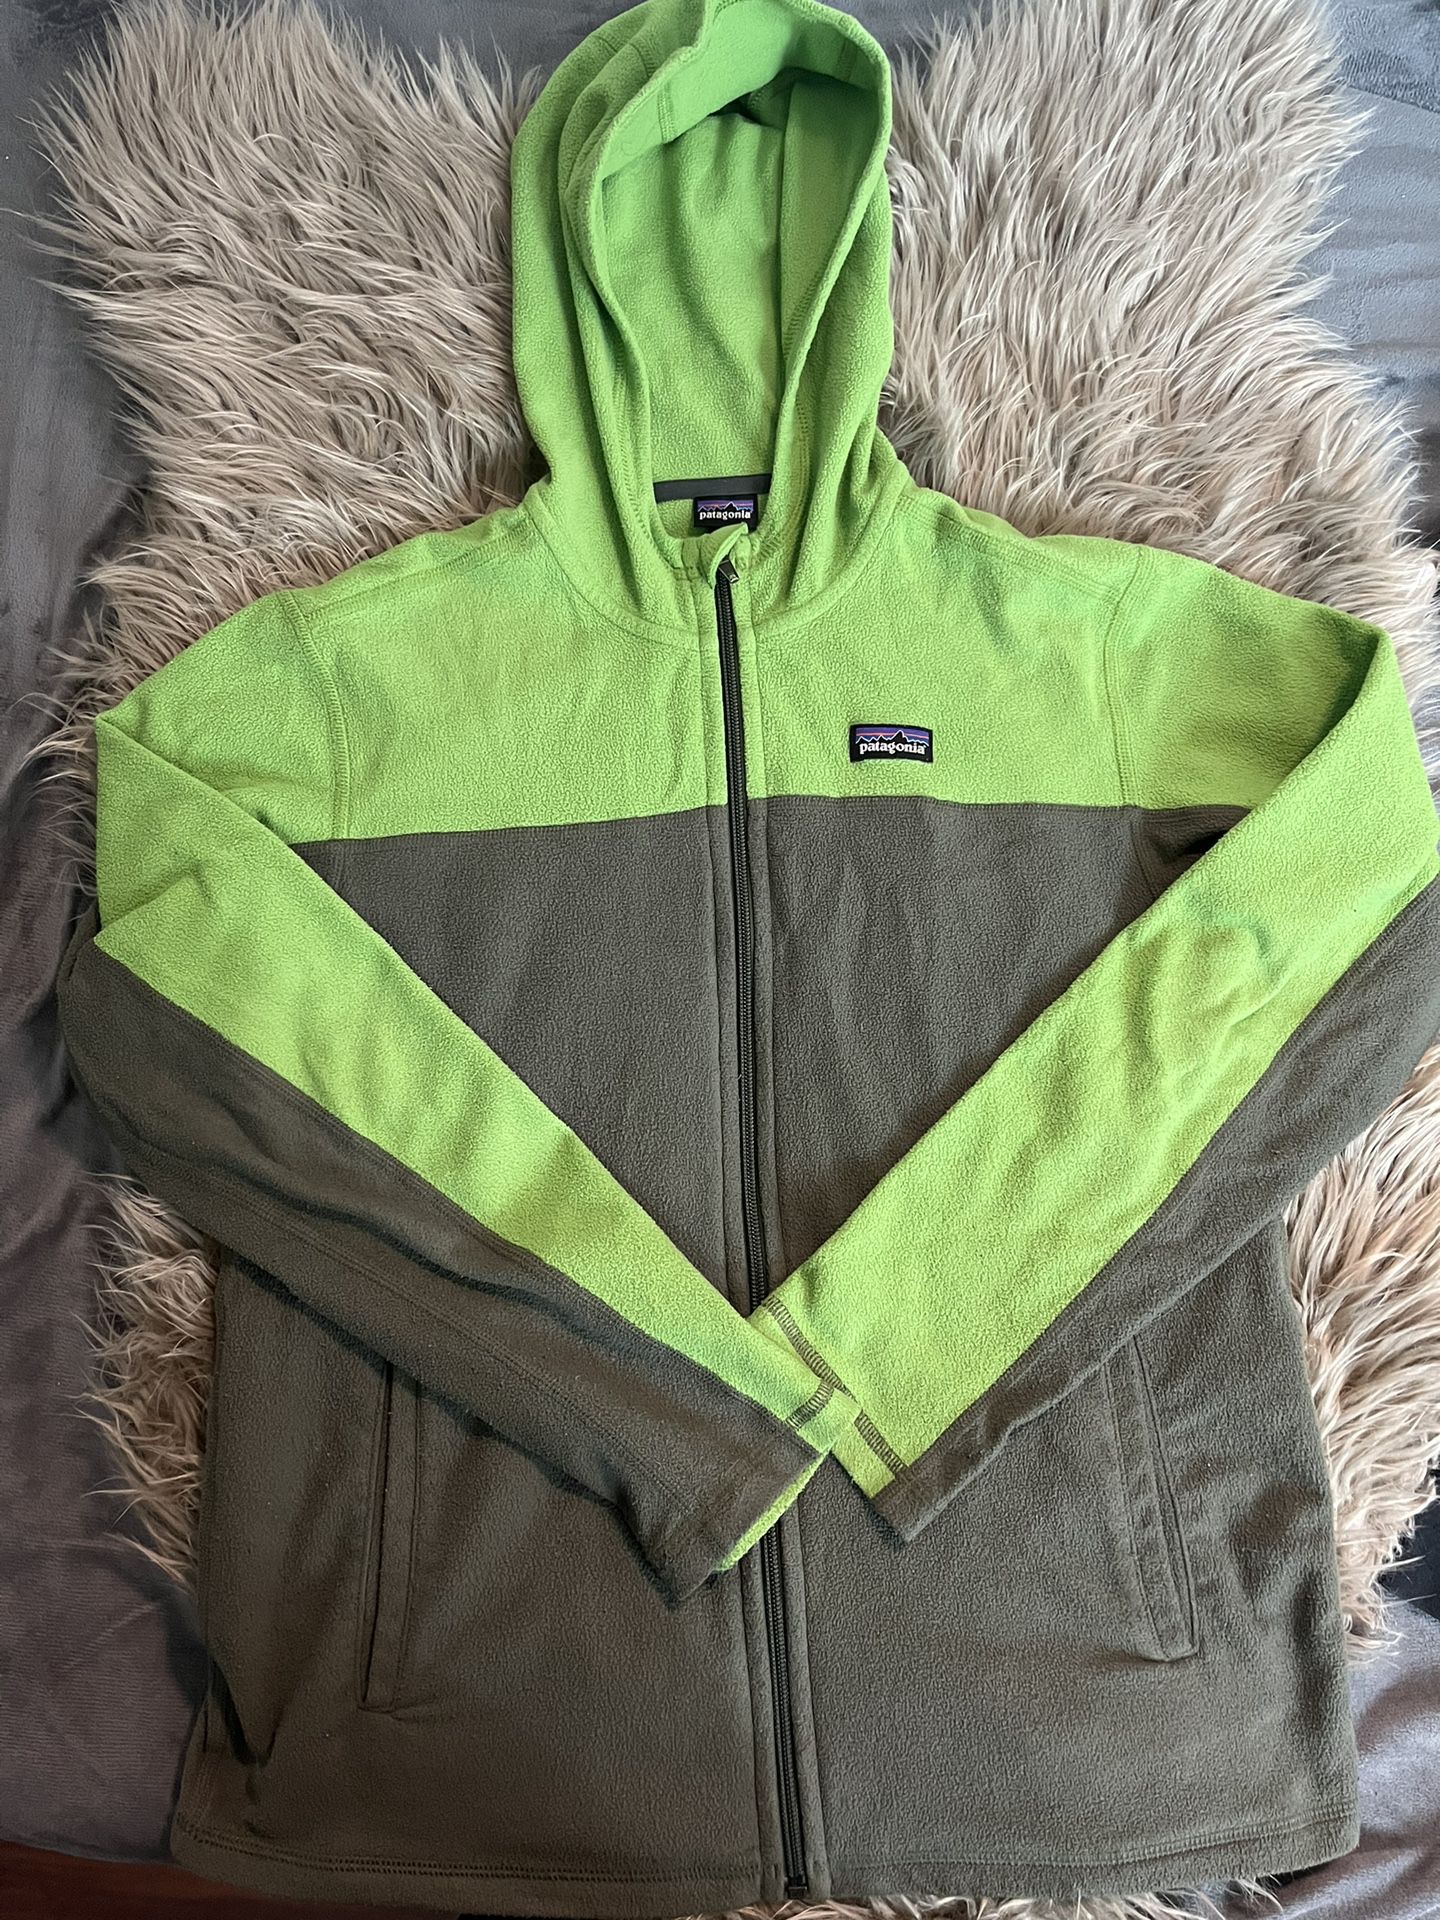 Green Patagonia Size Small